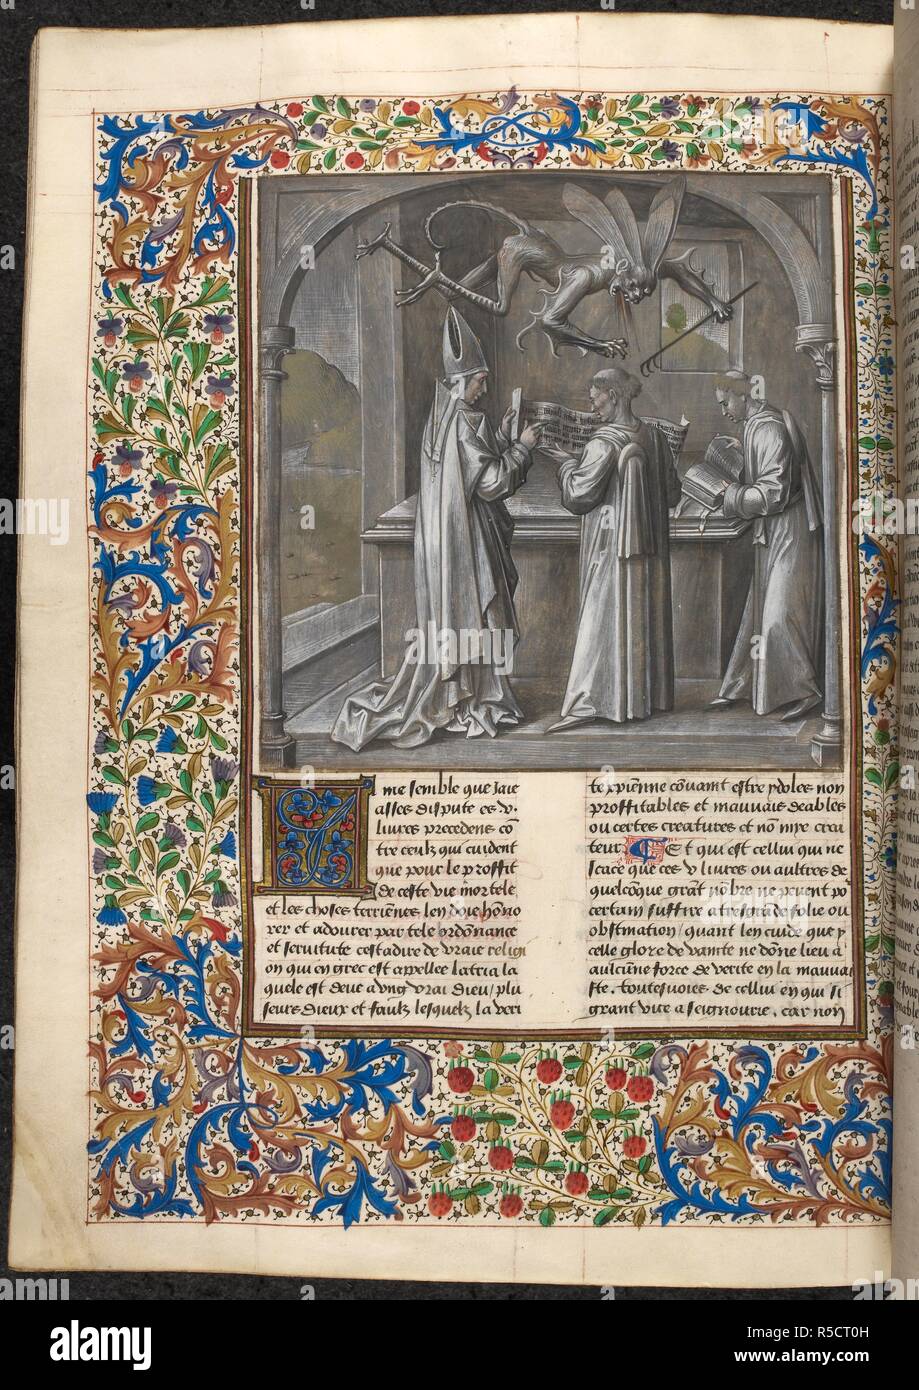 St. Augustine teaching two clerks, a devil flying above. S. AUGUSTINE, De civitate Dei, in French: the translation and commentary made by Raoul de Presles for Charles V of France. Late 15th century. Source: Royal 14 D. I f.273v. Language: French. Author: de Presles, Raoul (Translator). Stock Photo